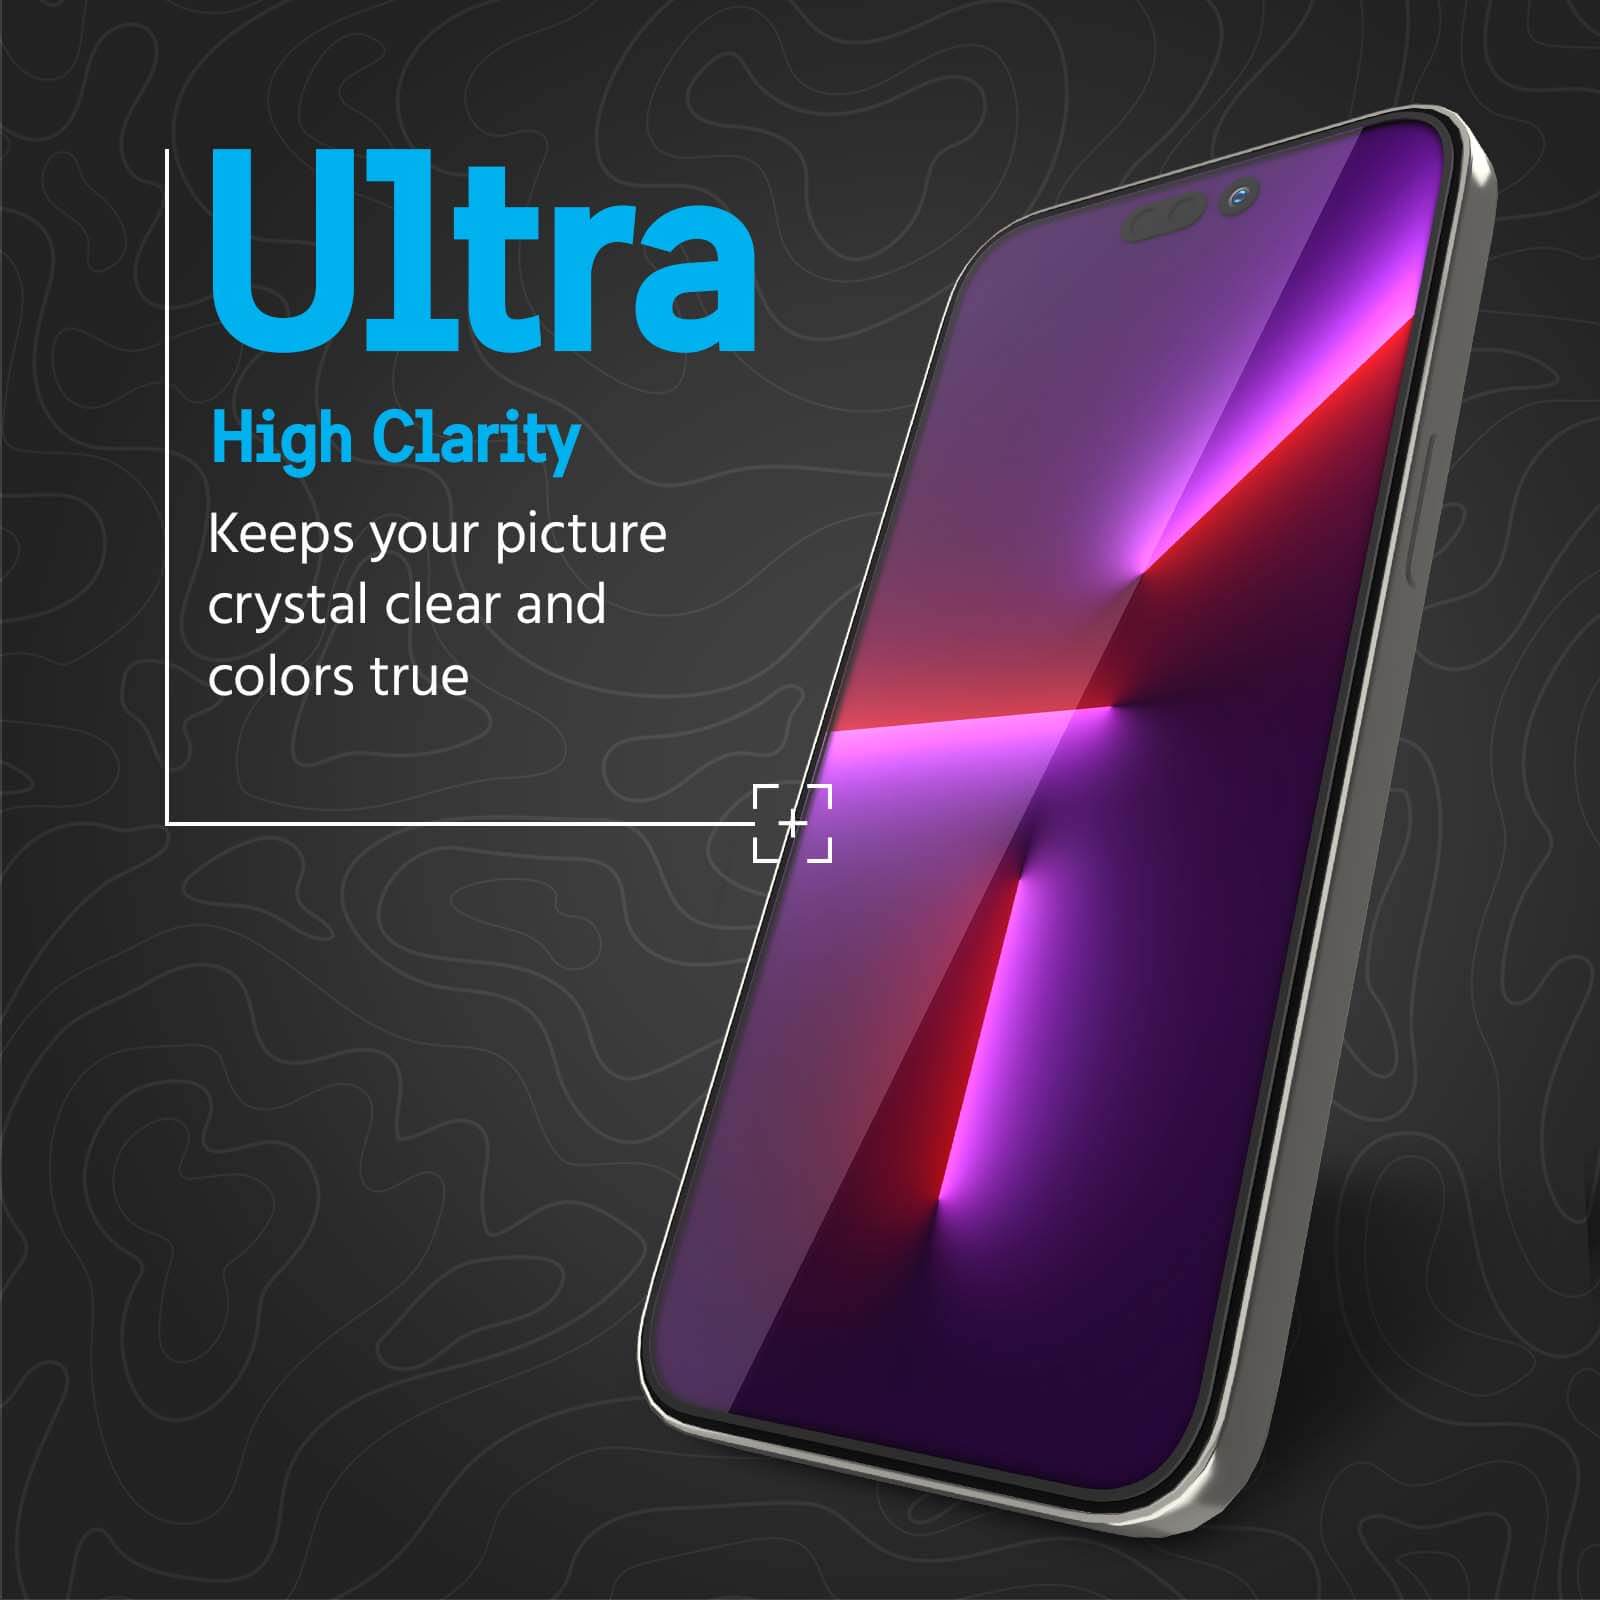 Ultra High Clarity. Keeps your picture crystal clear and colors true. color::clear